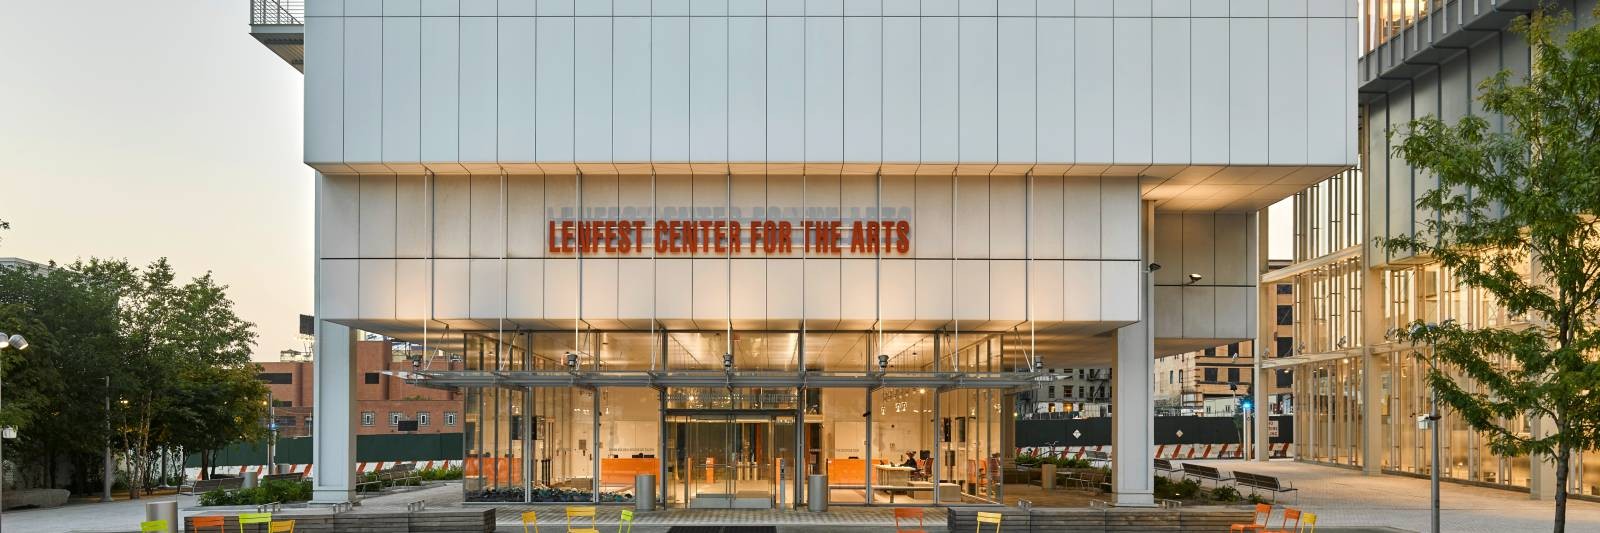 Image of Lenfest Center for the Arts as seen from the Small Square